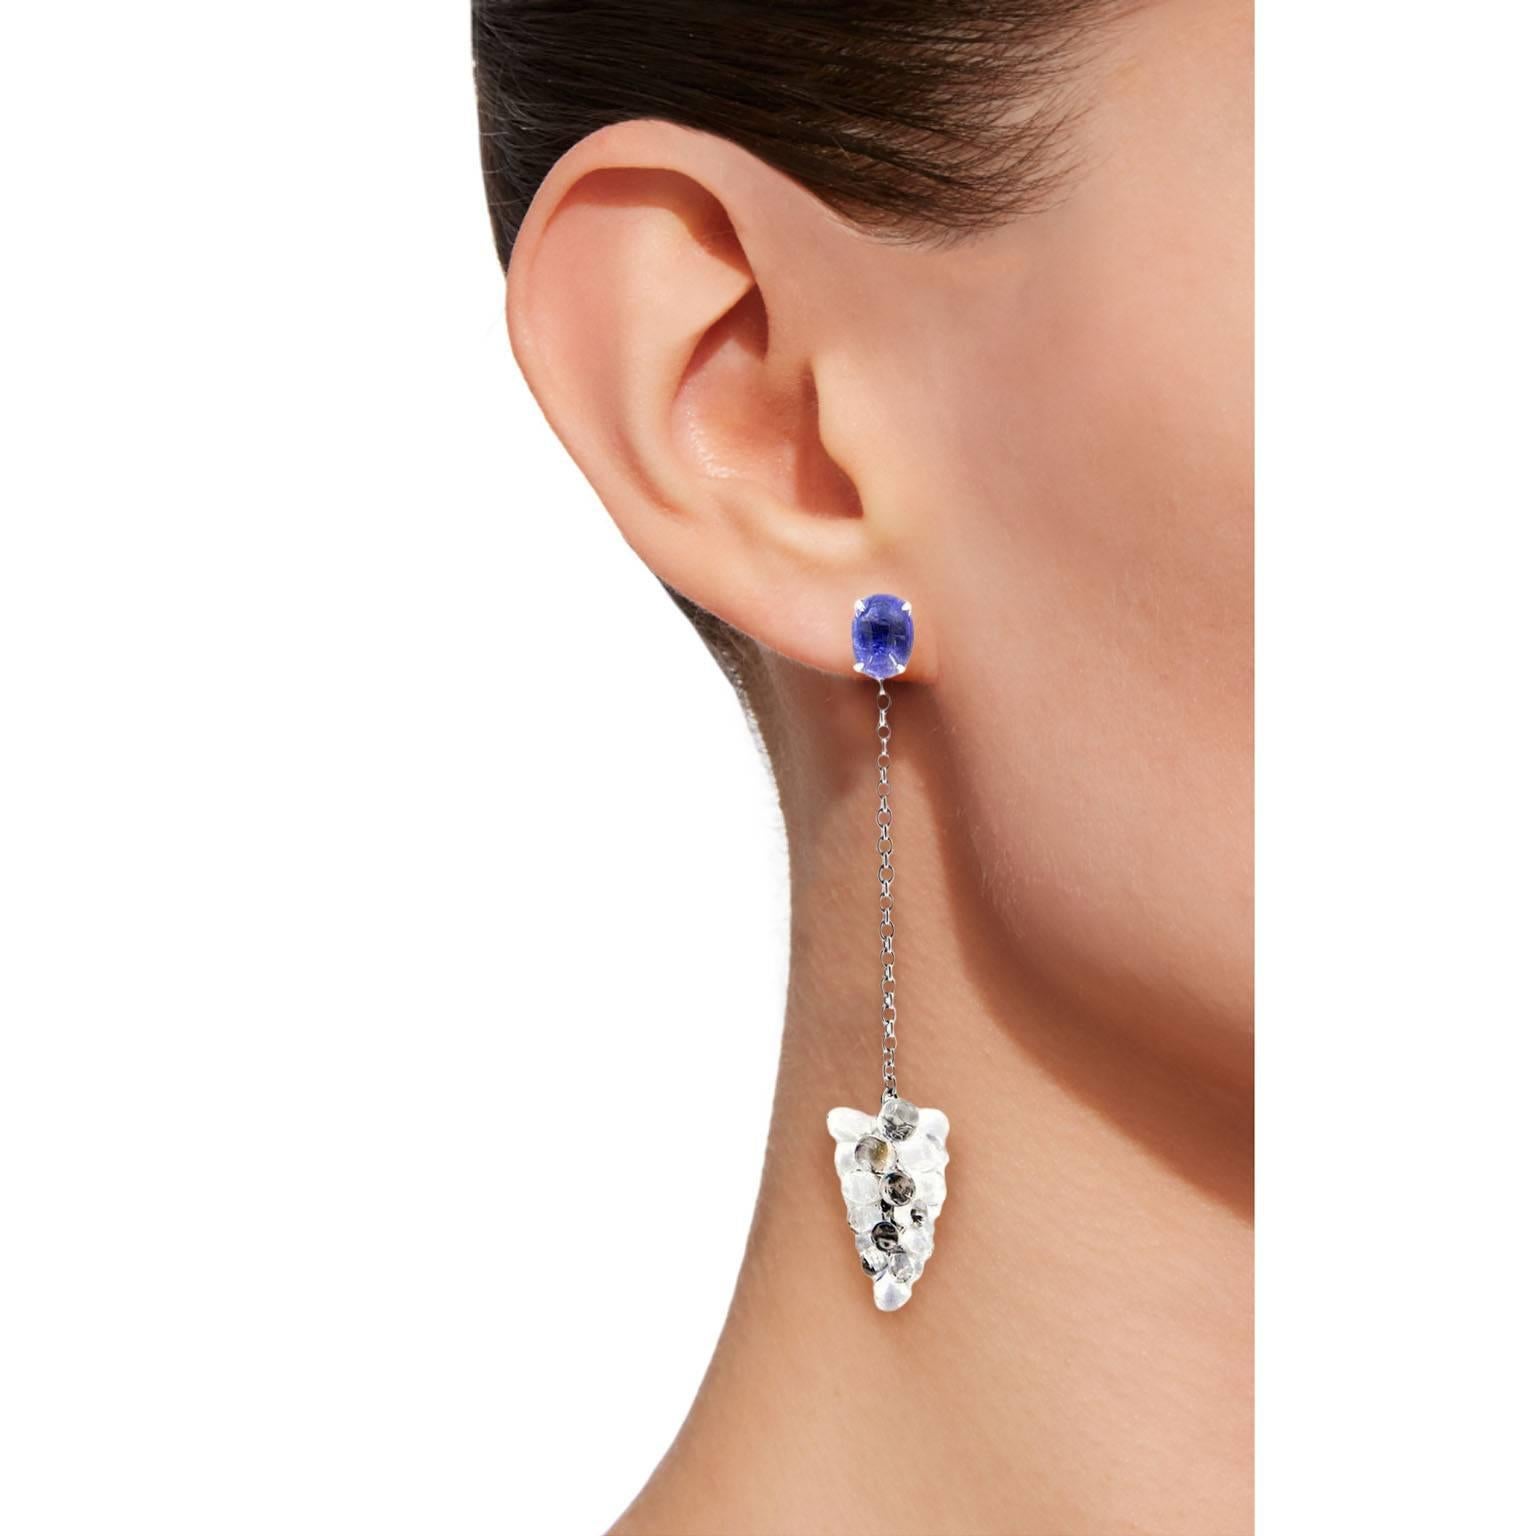 Jona design collection, hand crafted in Italy, beautiful Cluster of natural cabochon cut Moonstone drops weighing 22 carats dangling from two cabochon cut oval Tanzanite, weighing 3.59 carats in total, mounted in 18k white gold. Length 2.65